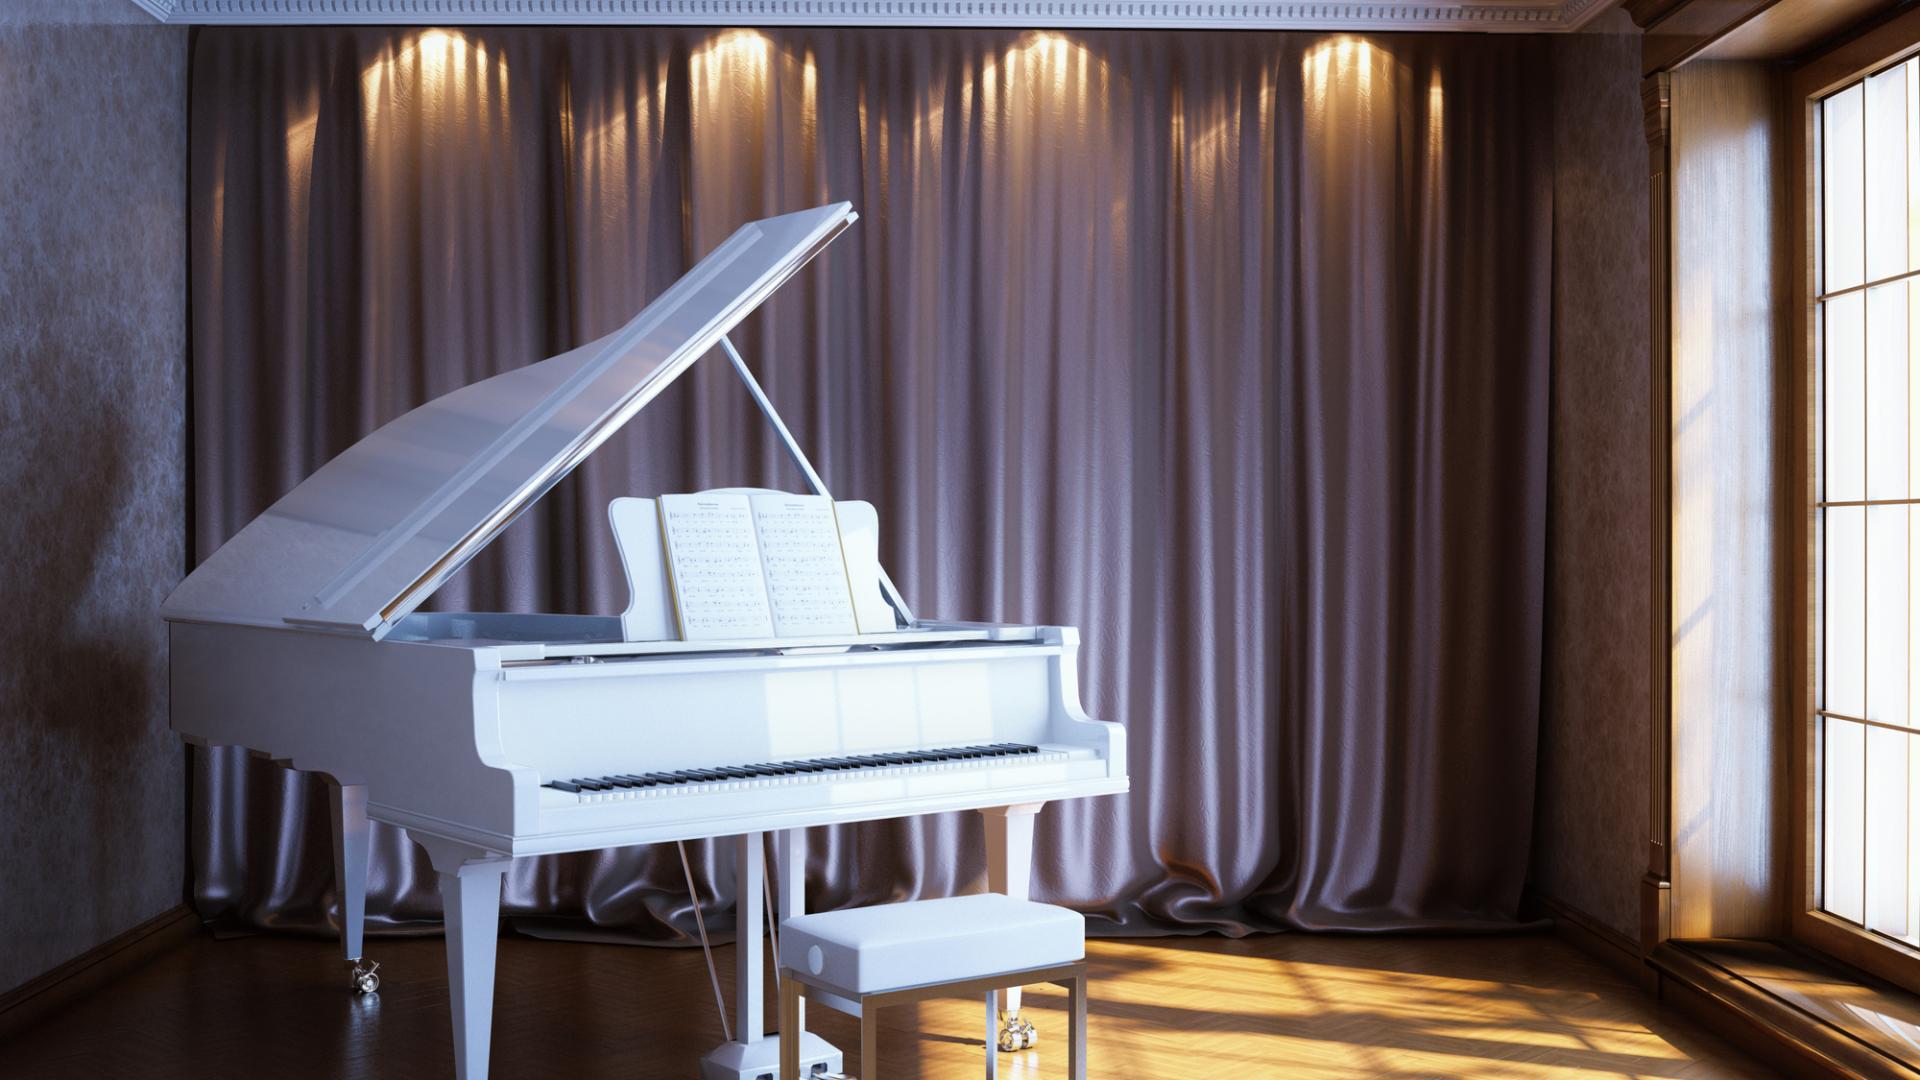 Piano Practice Rooms for Rent in New York City, NY